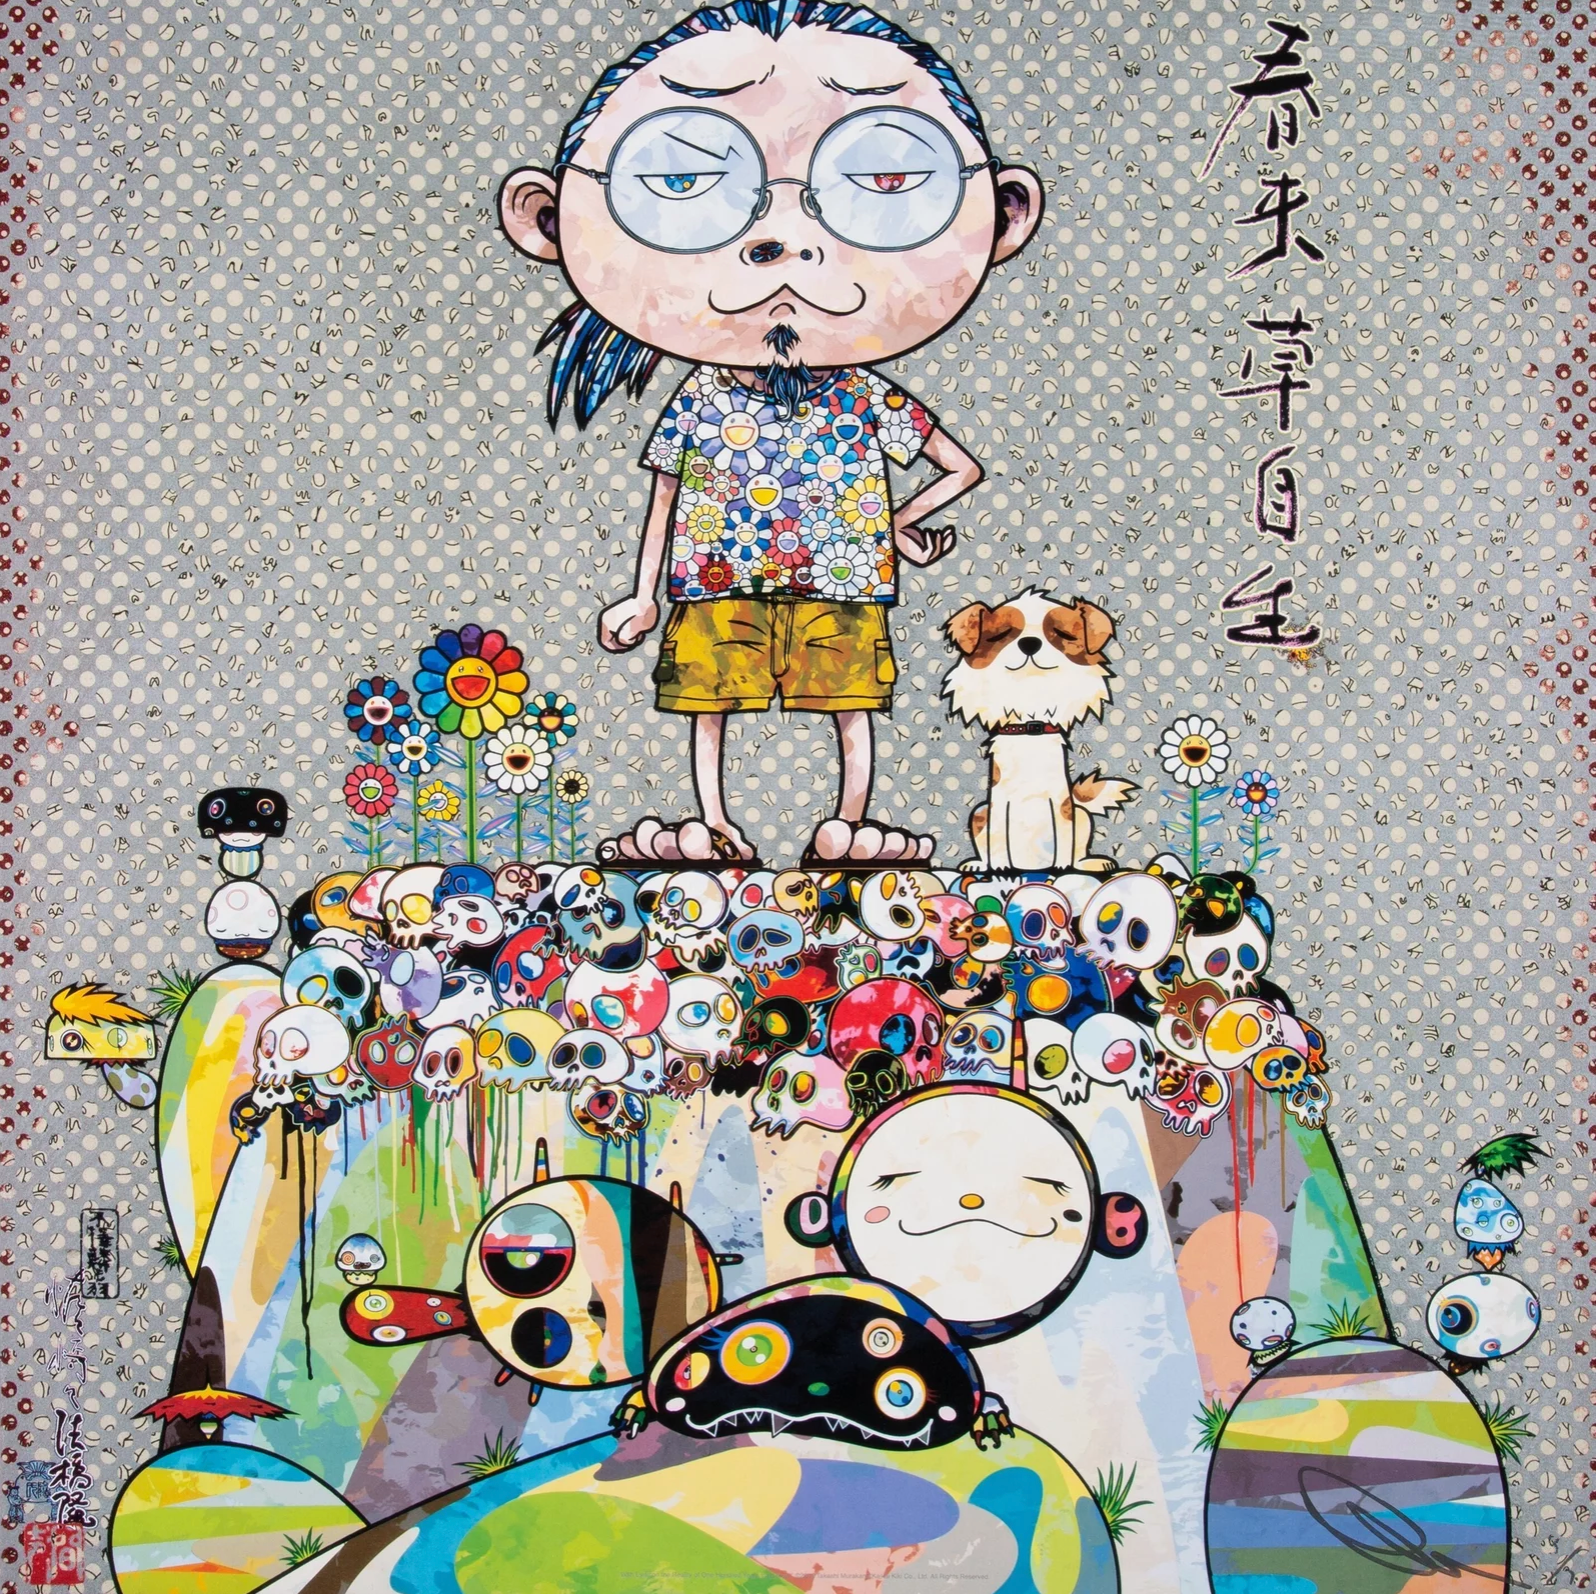 Takashi Murakami - With Eyes on the Reality of One Hundred Years from Now, 2013 - Pinto Gallery